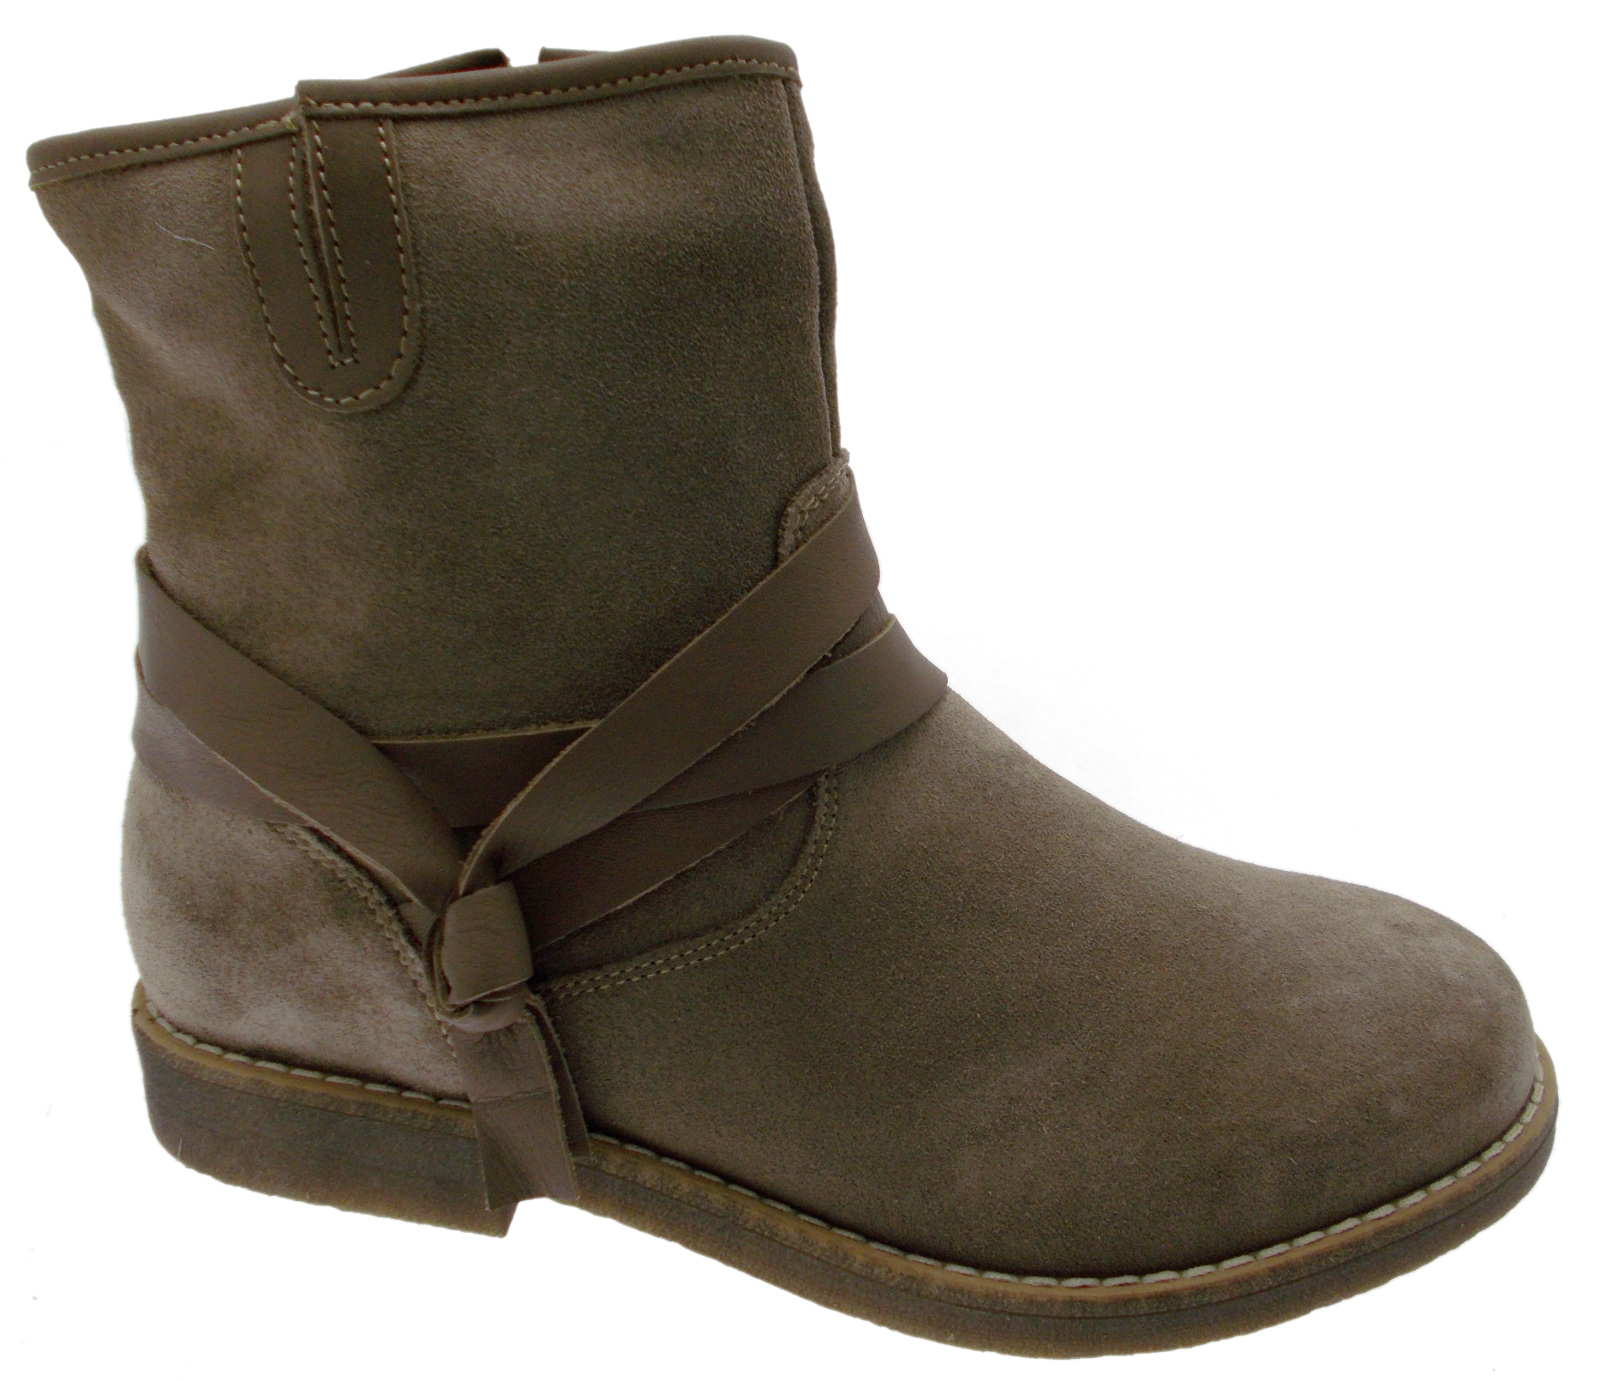 Article C3708 boot Anckle boot taupe suede footbed Orthopedic dove ...